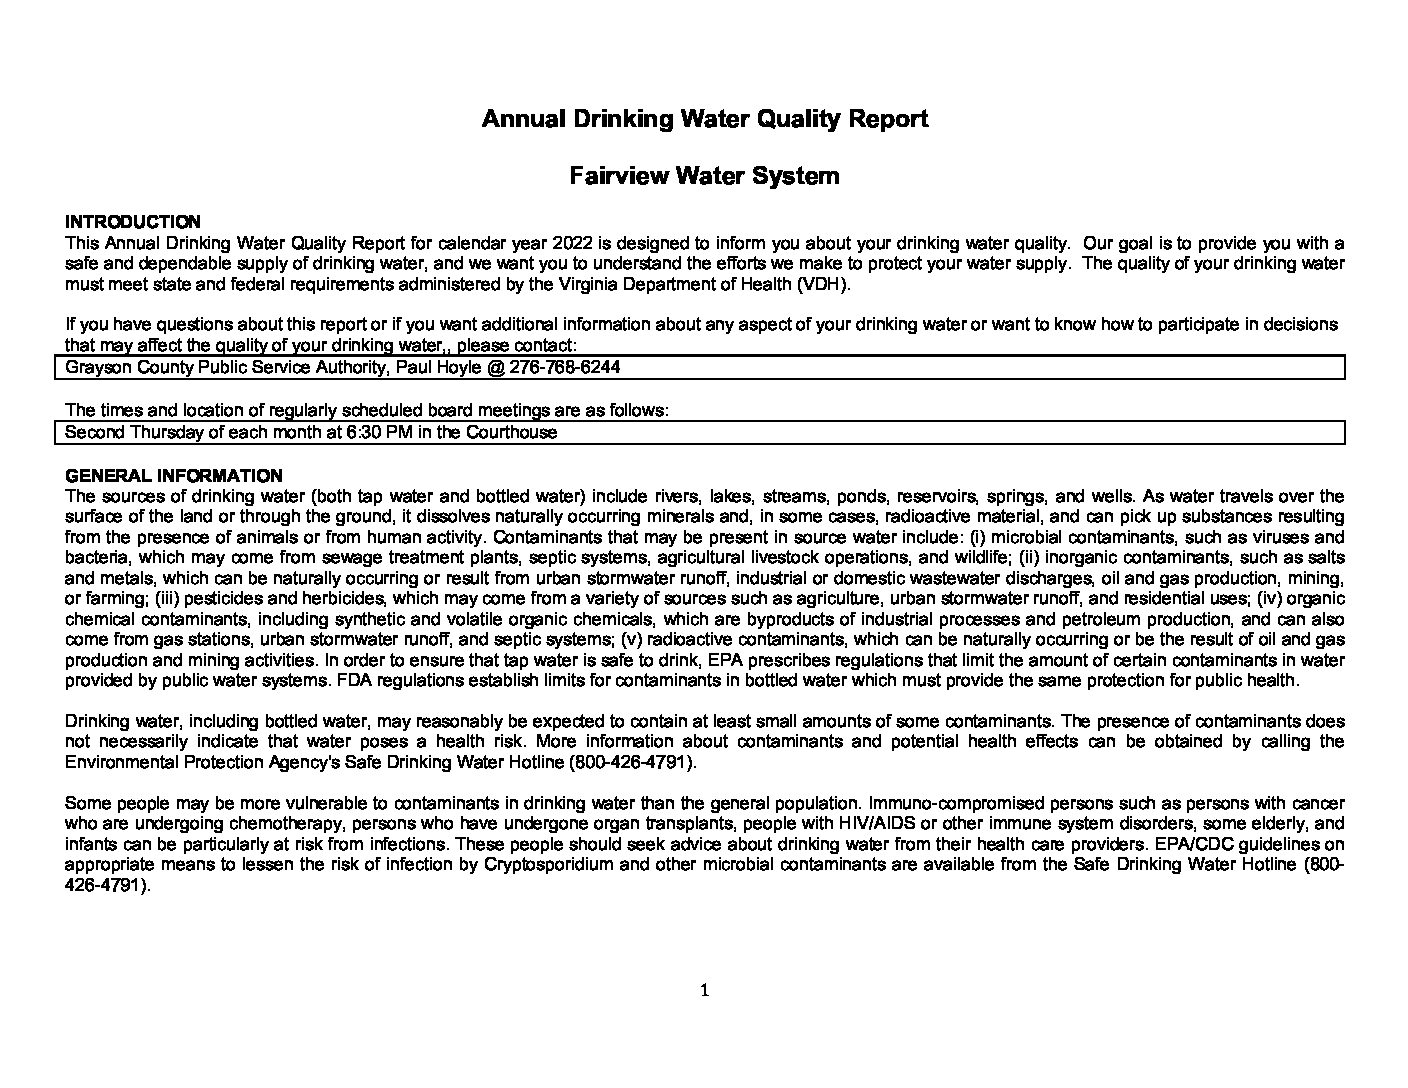 Fairview Annual Drinking Water Quality Report_(2022) Grayson County